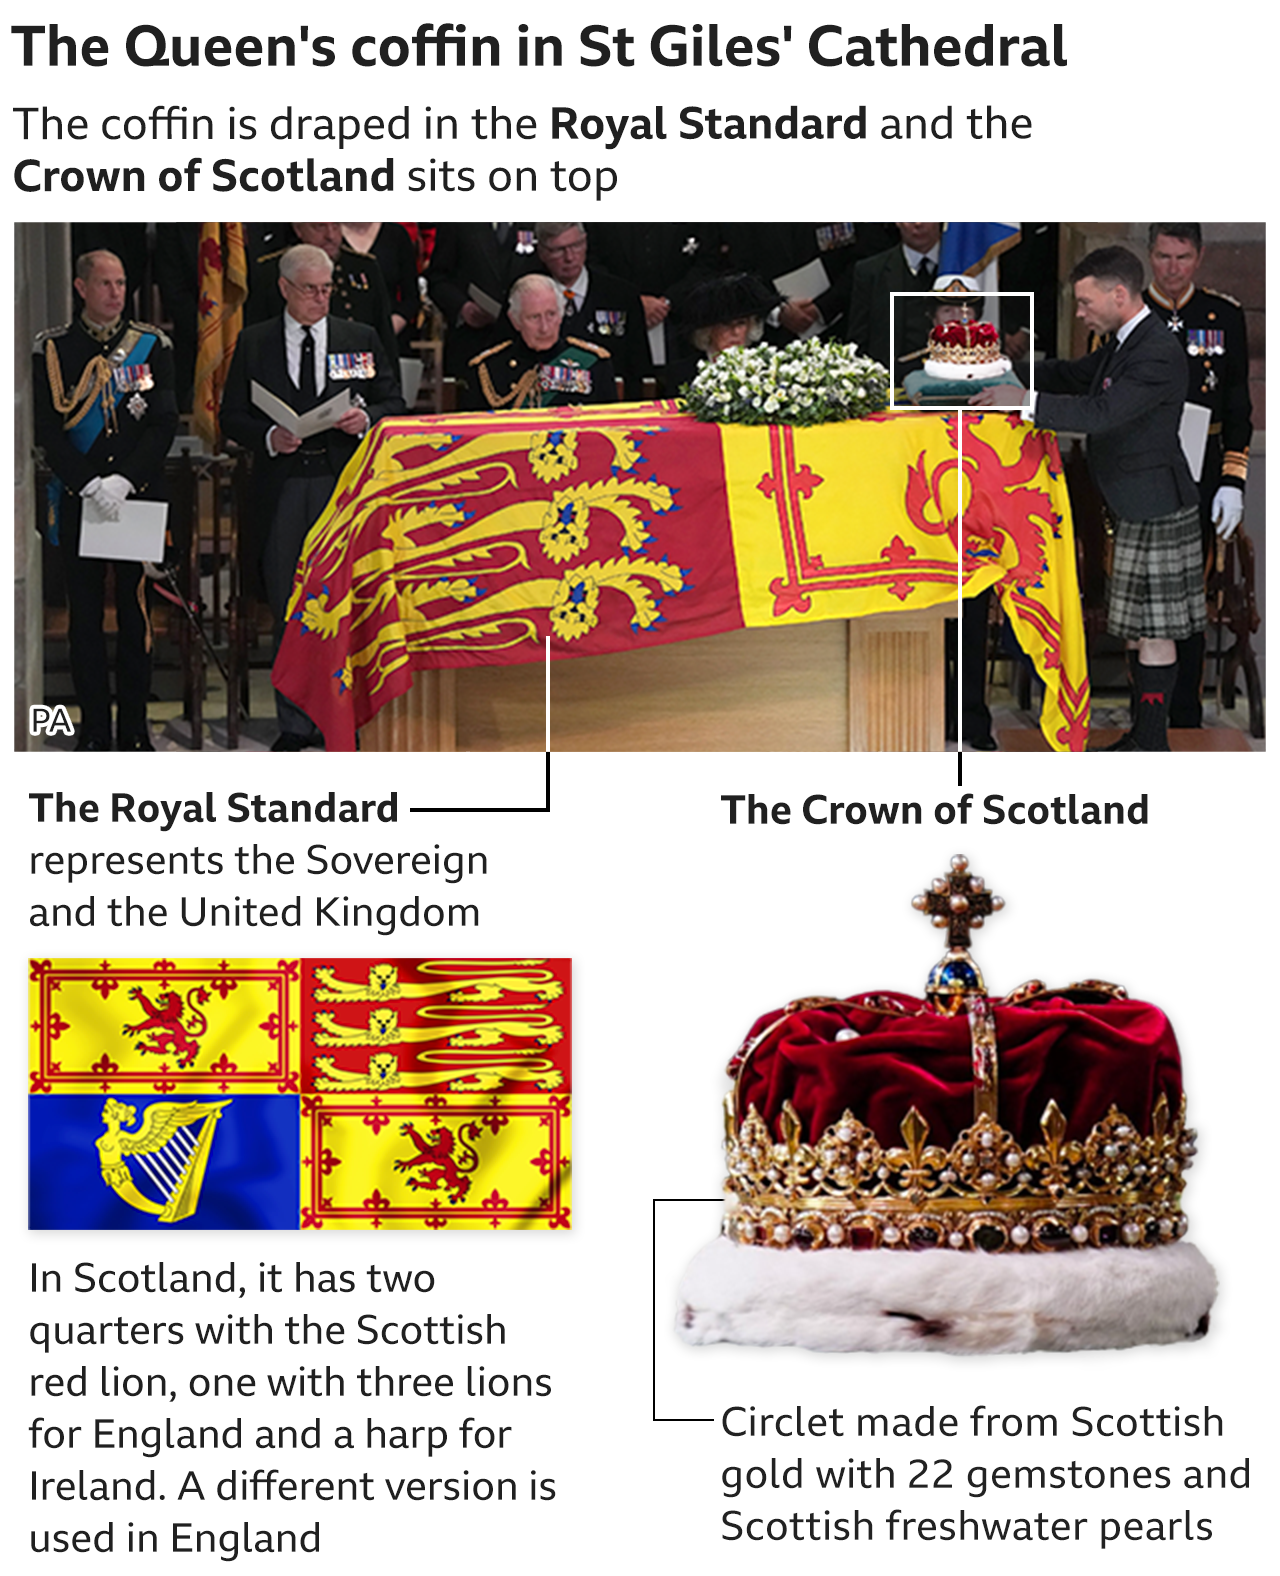 The Queen's coffin graphic